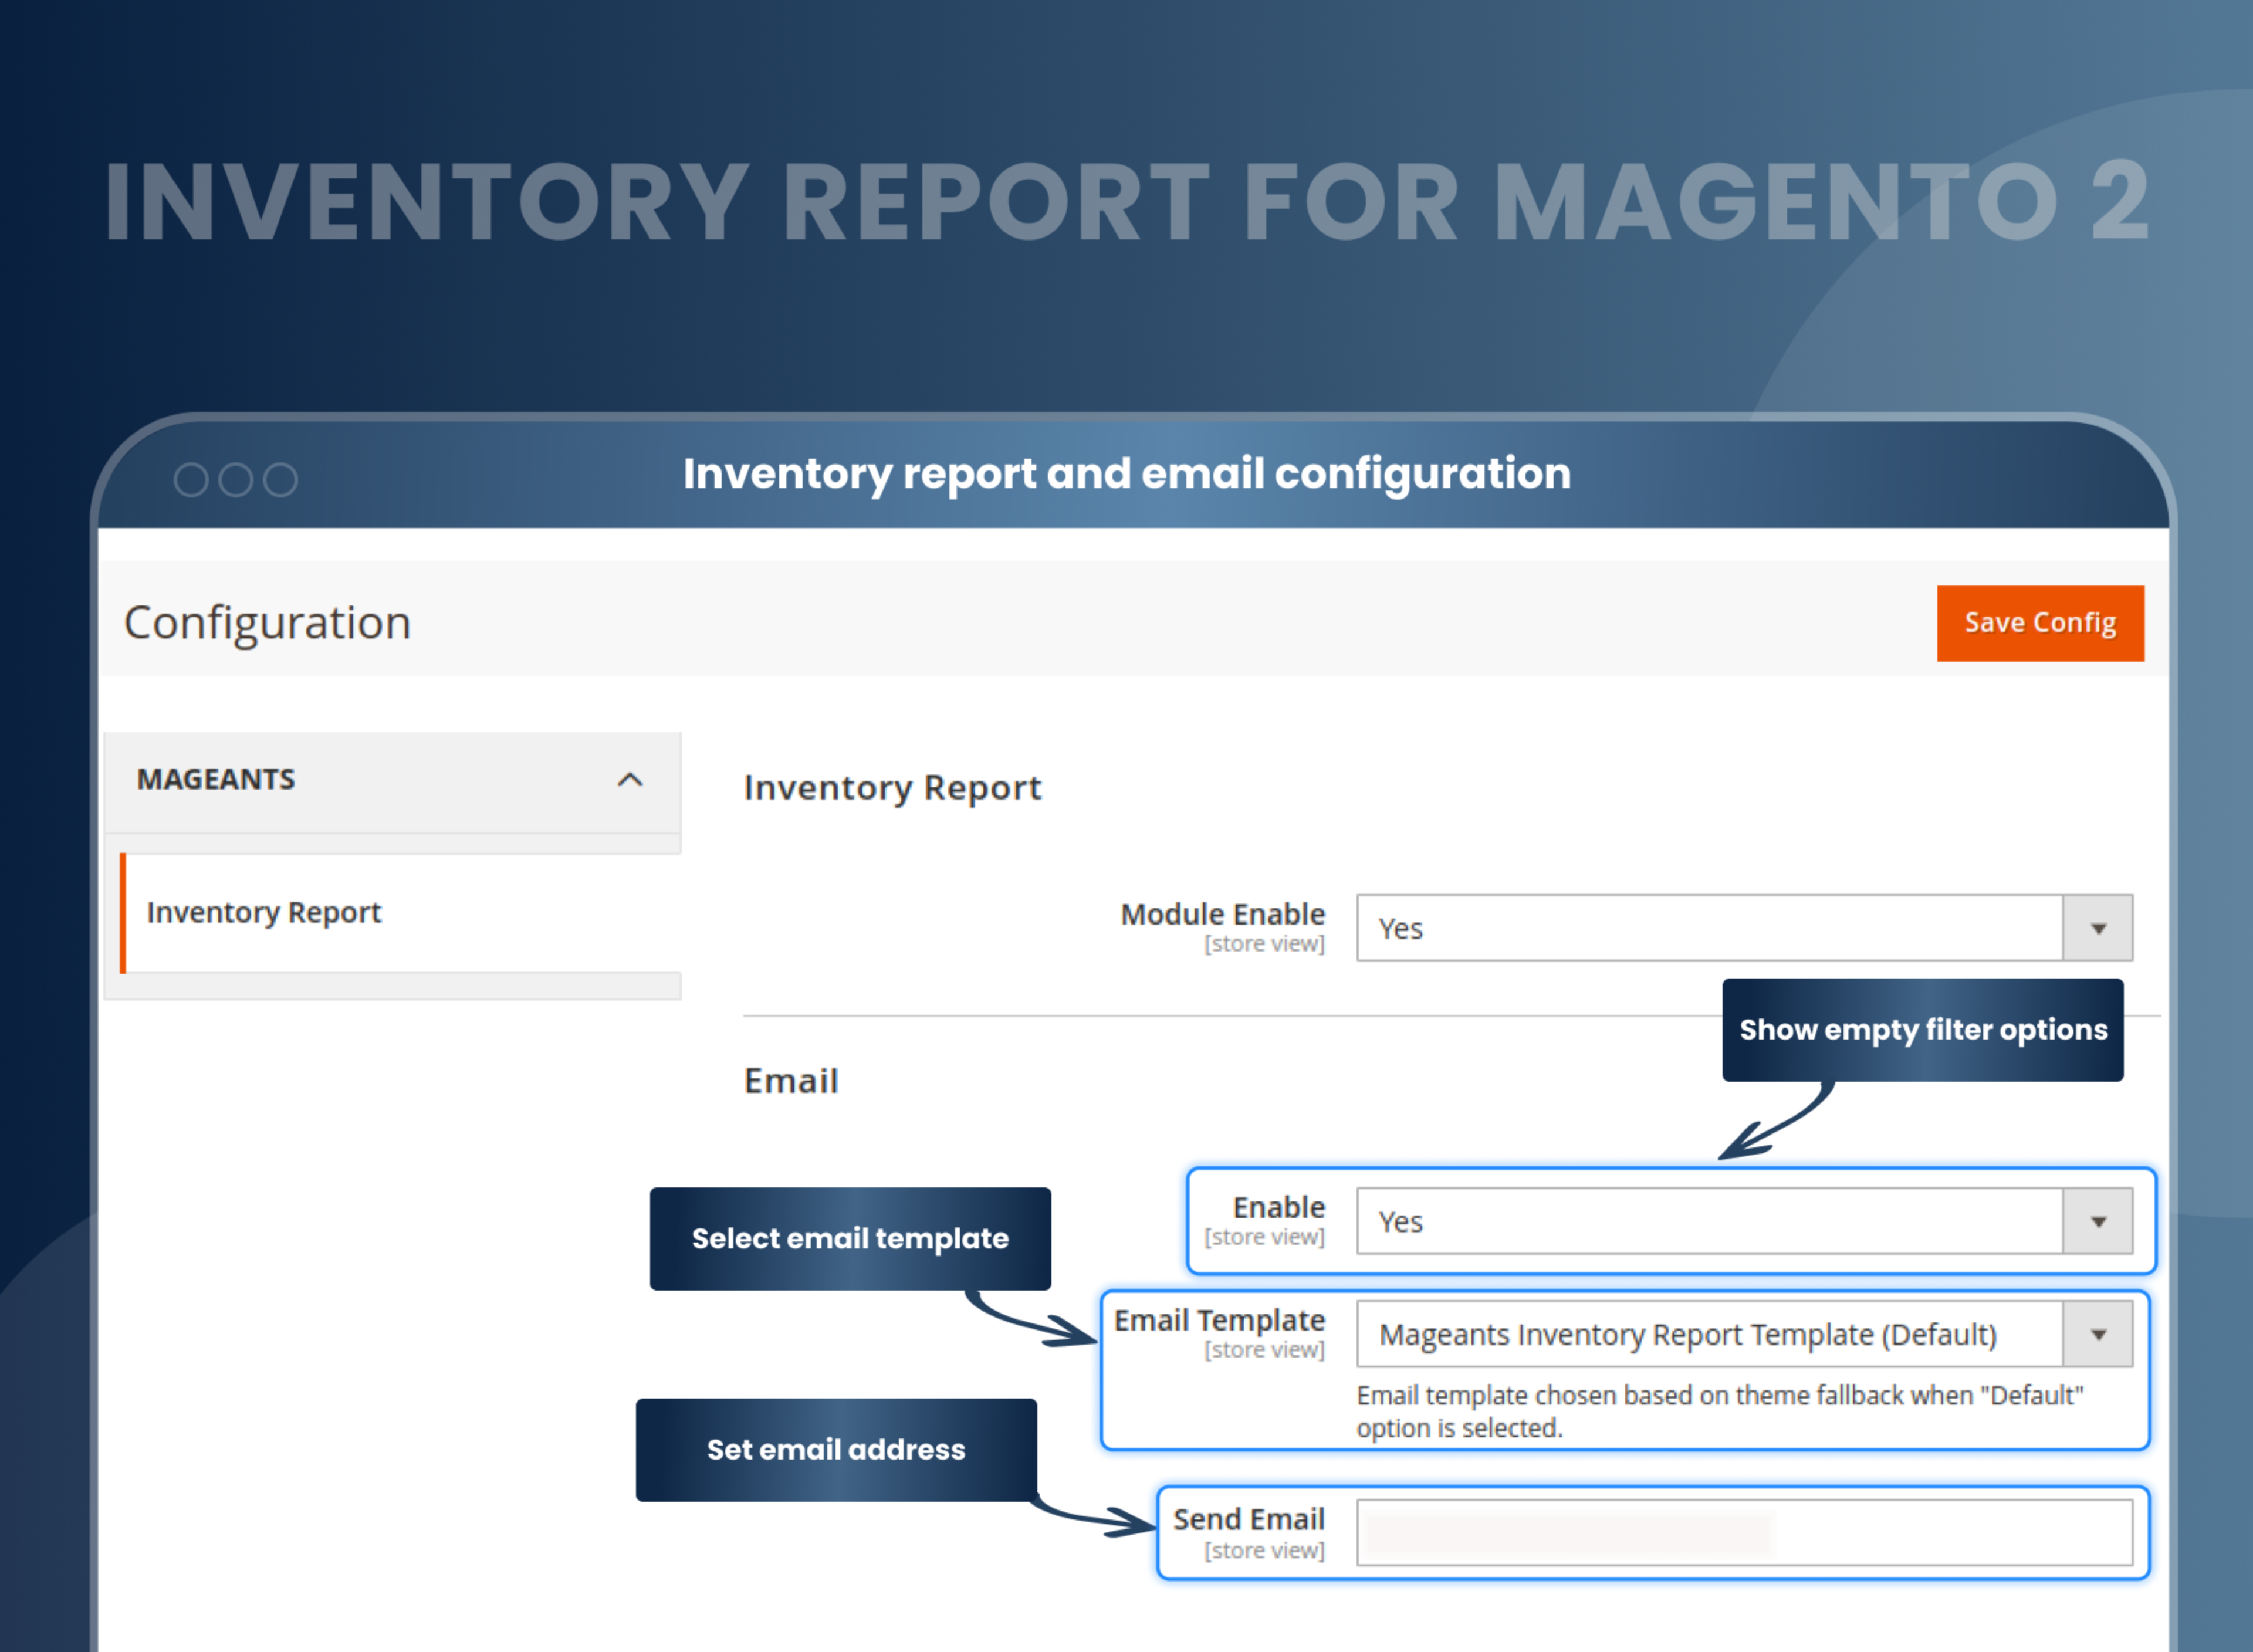 Inventory report and email configuration